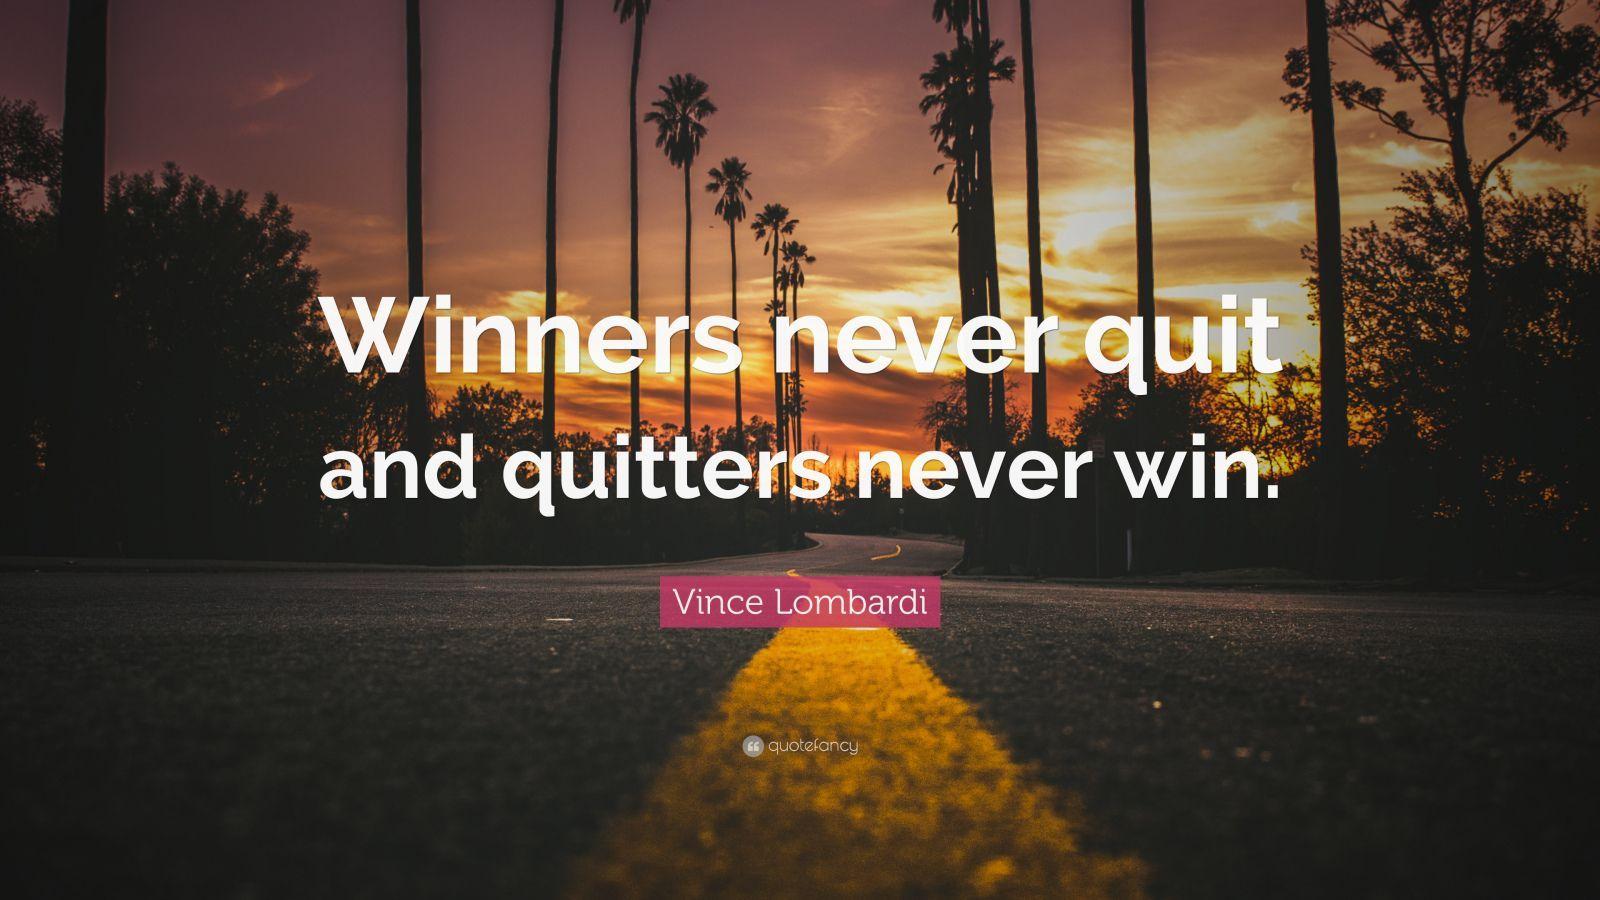 Vince Lombardi Quotes (100 wallpaper)